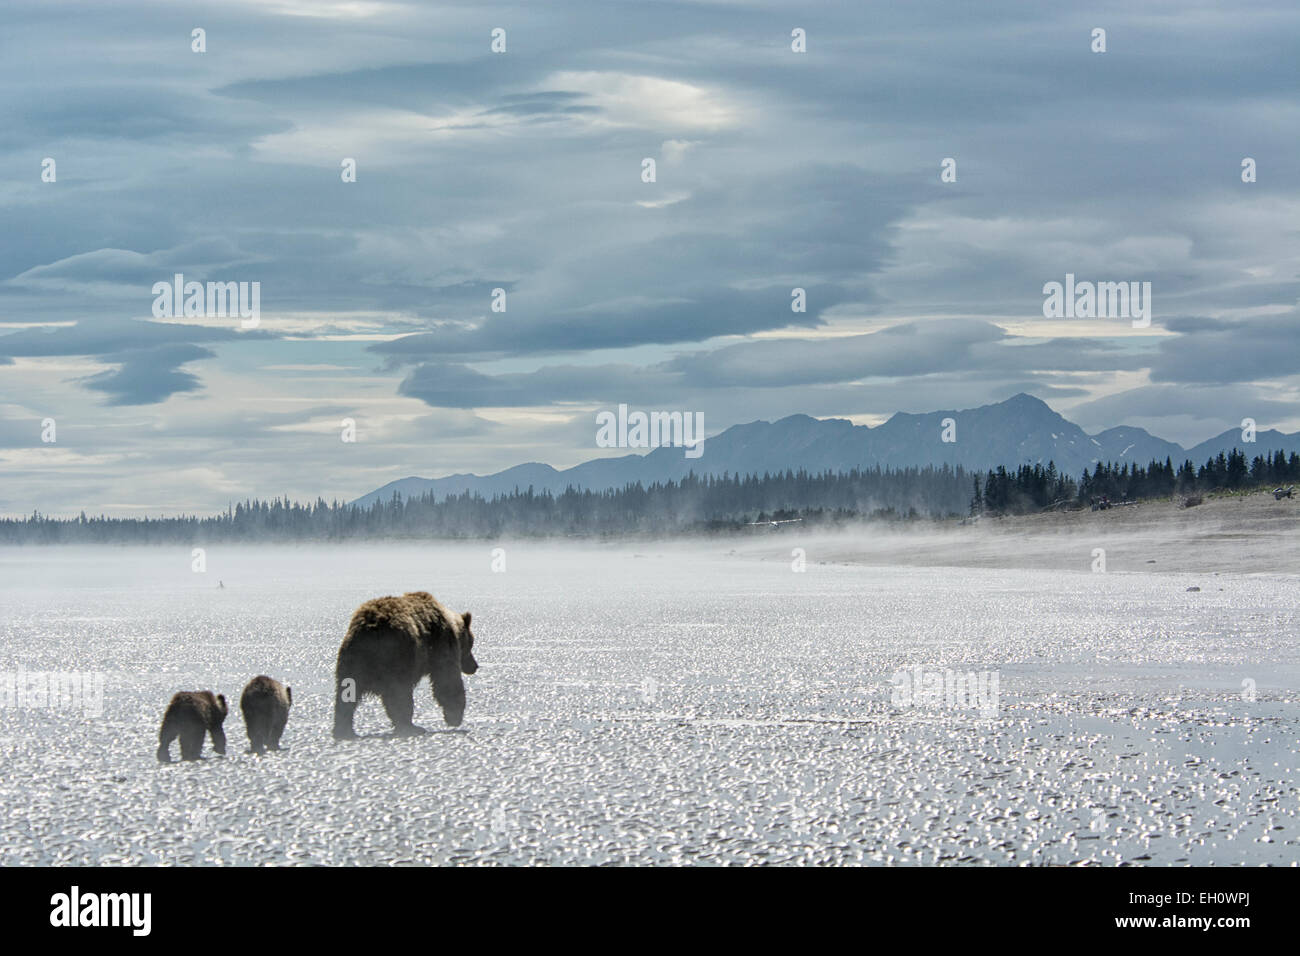 Grizzly Bear Mother leading two Spring Cubs, Ursus arctos, walking across the tidal flats of the Cook Inlet, Alaska, USA Stock Photo